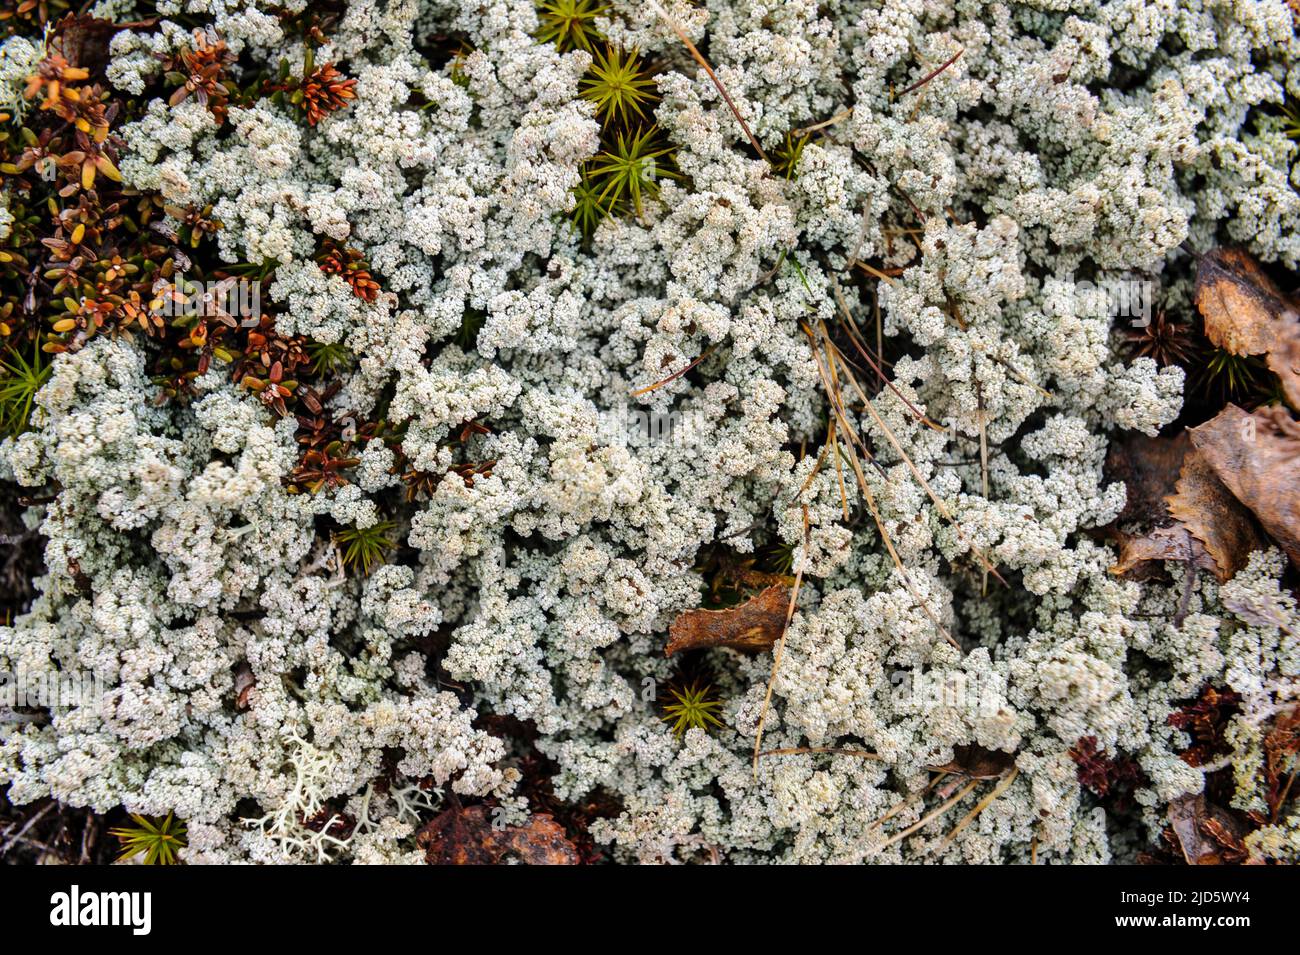 Stereocaulon sp. (possibly Finger-scale Foam Lichen, S. dactylophyllum) from Dovrefjell, Norway. Stock Photo